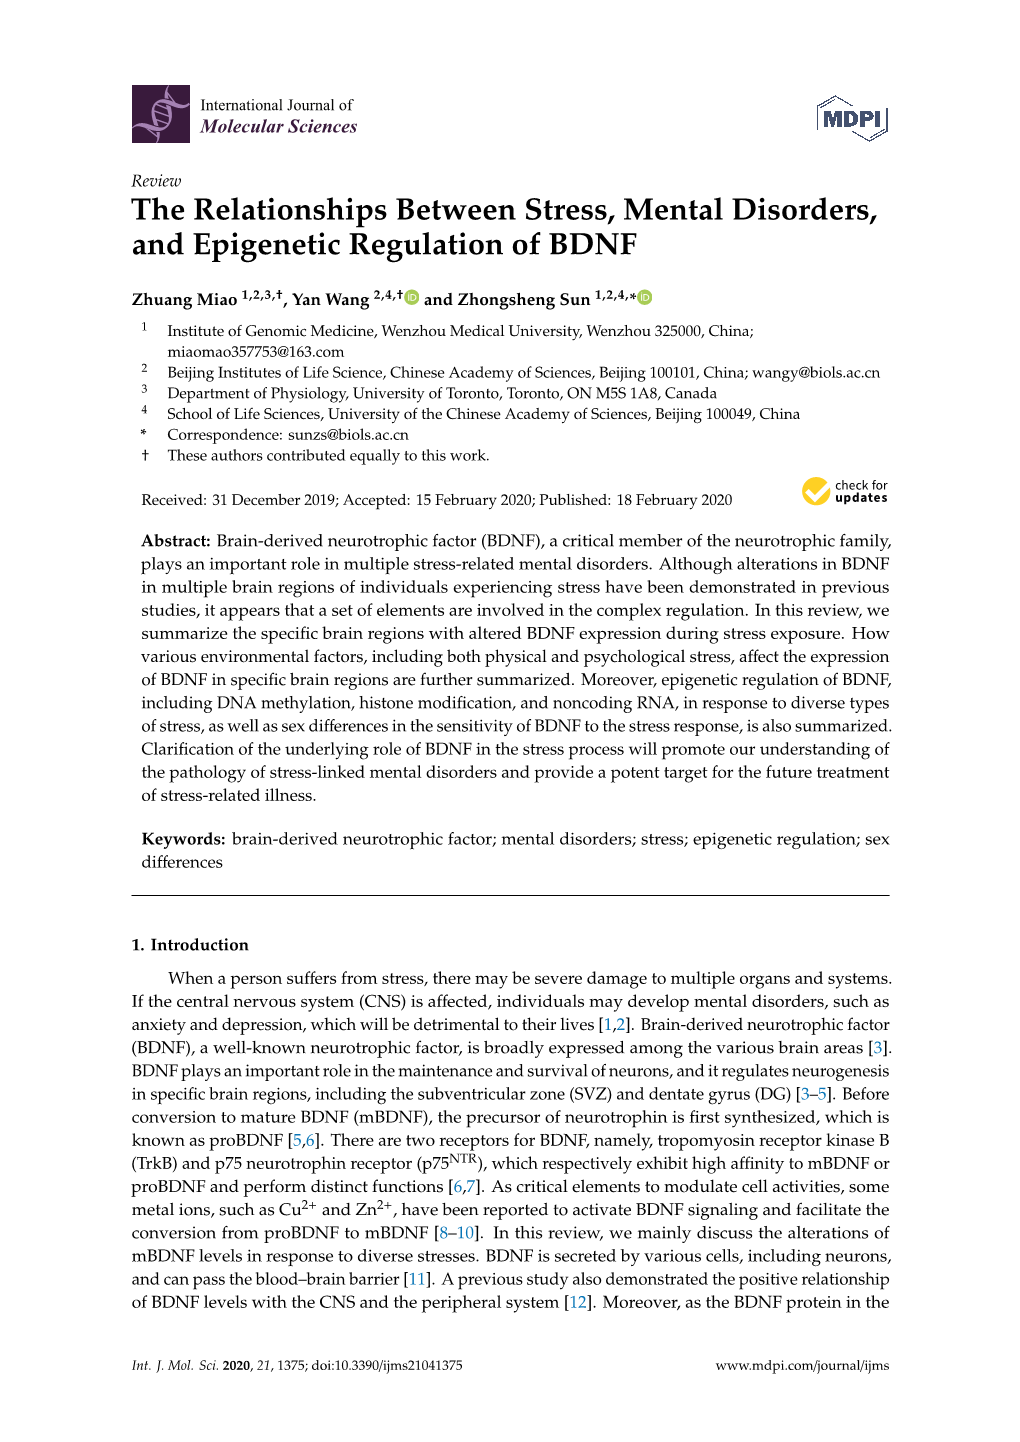 The Relationships Between Stress, Mental Disorders, and Epigenetic Regulation of BDNF